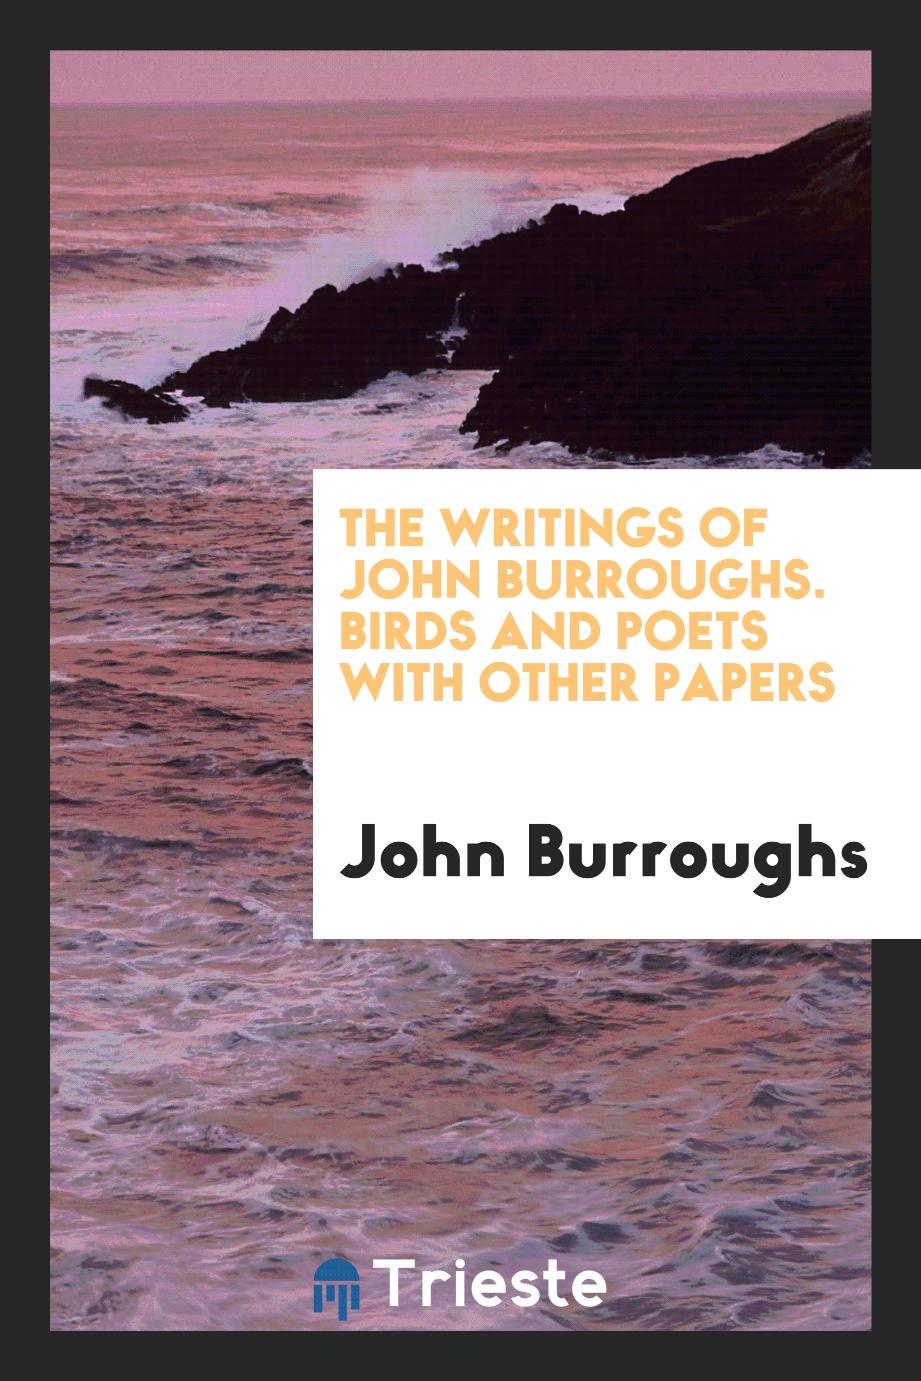 John Burroughs - The Writings of John Burroughs. Birds and Poets with Other Papers